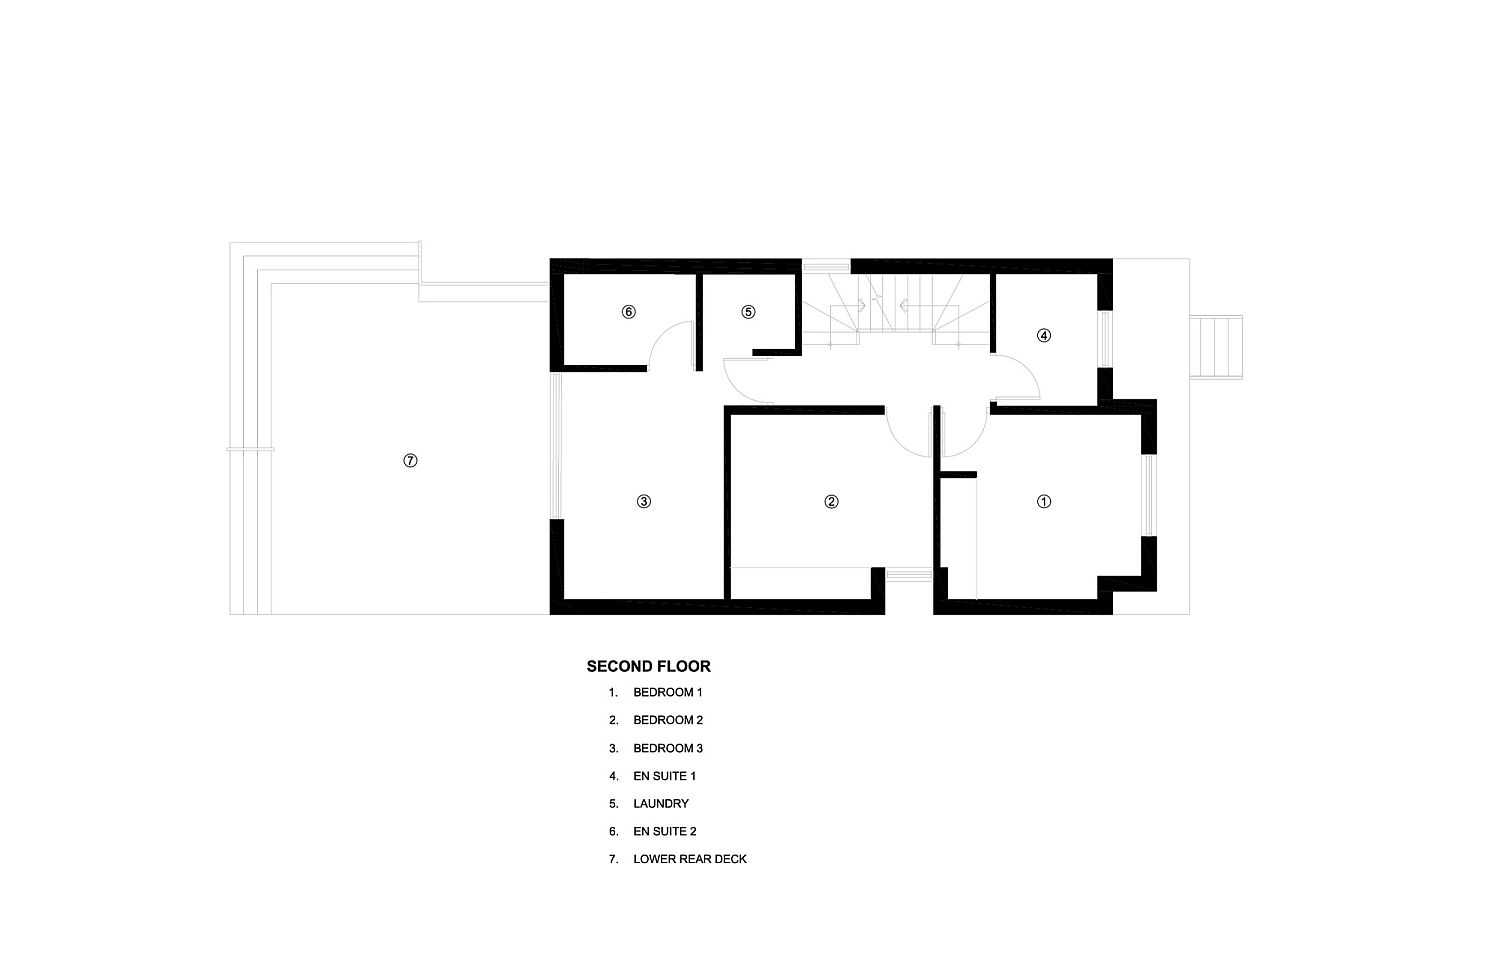 Second floor plan of the Art House